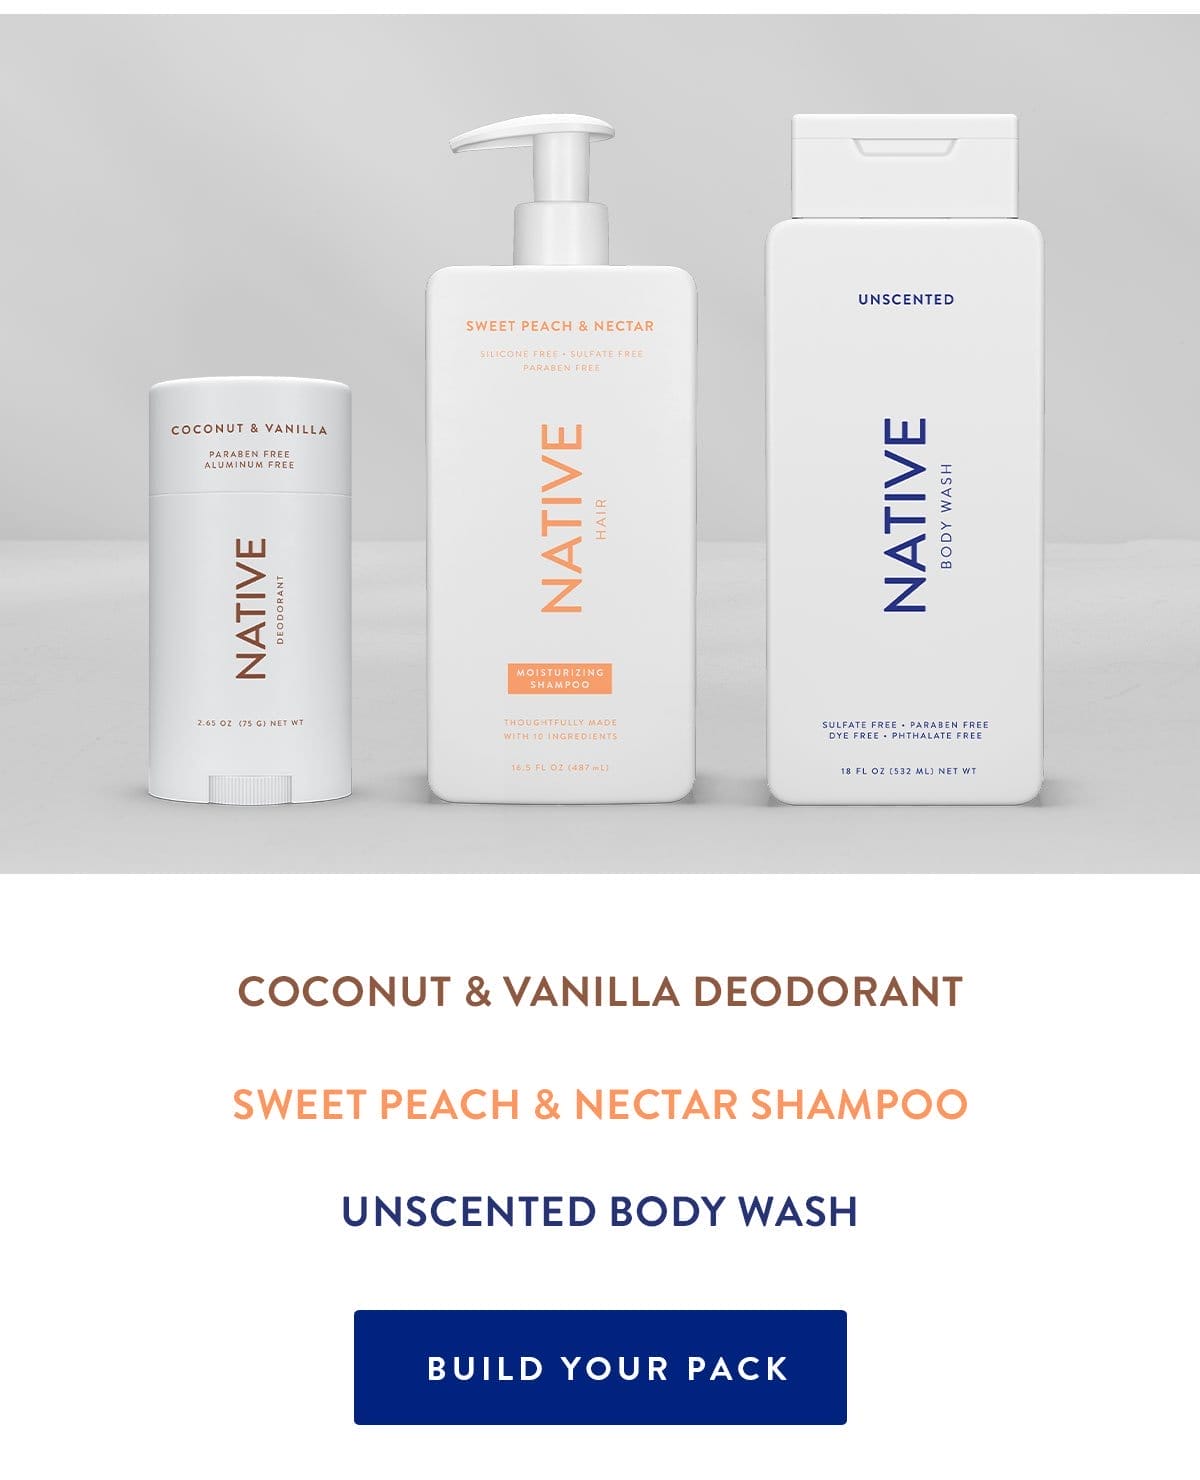 Coconut & Vanilla Deodorant | Sweet Peach & Nectar Shampoo | Unscented Body Wash | BUILD YOUR PACK